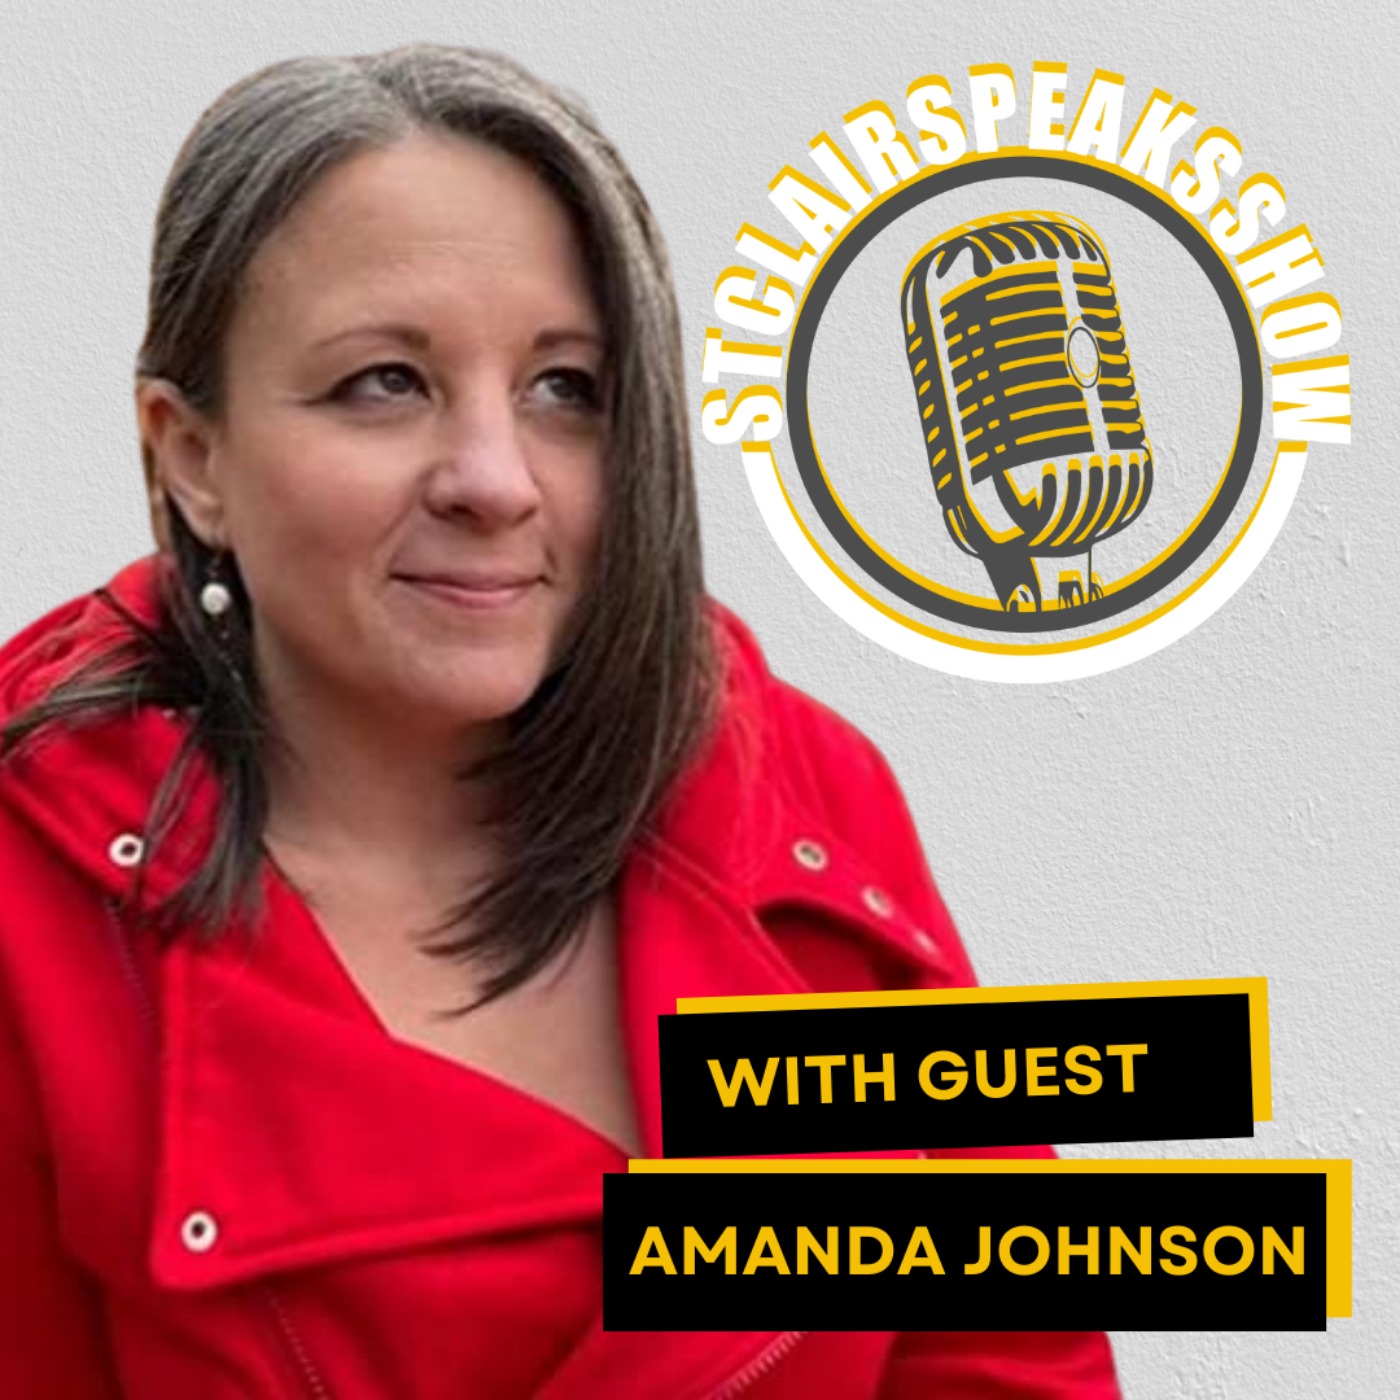 The StclairSpeaksShow Podcast with Amanda Johnson - Why Your Story Matters? | How Can Books Help Grow A Business Or Brand?